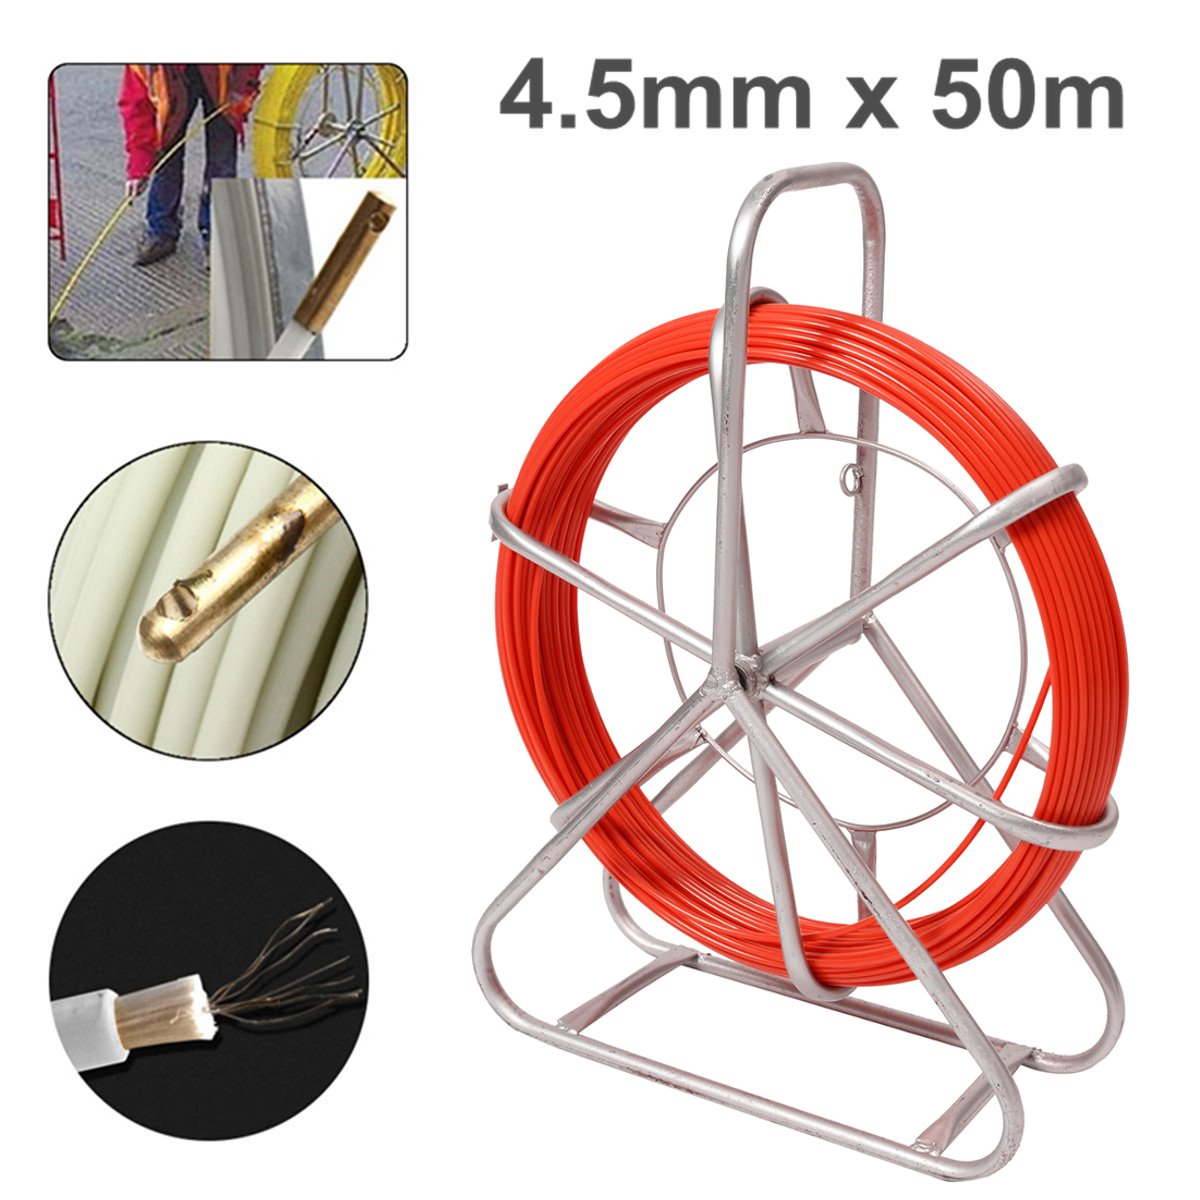 Find Fish Tape Fiberglass Cable Rod Duct Running Wire Puller Lead Rodder 4 5mmx50m for Sale on Gipsybee.com with cryptocurrencies